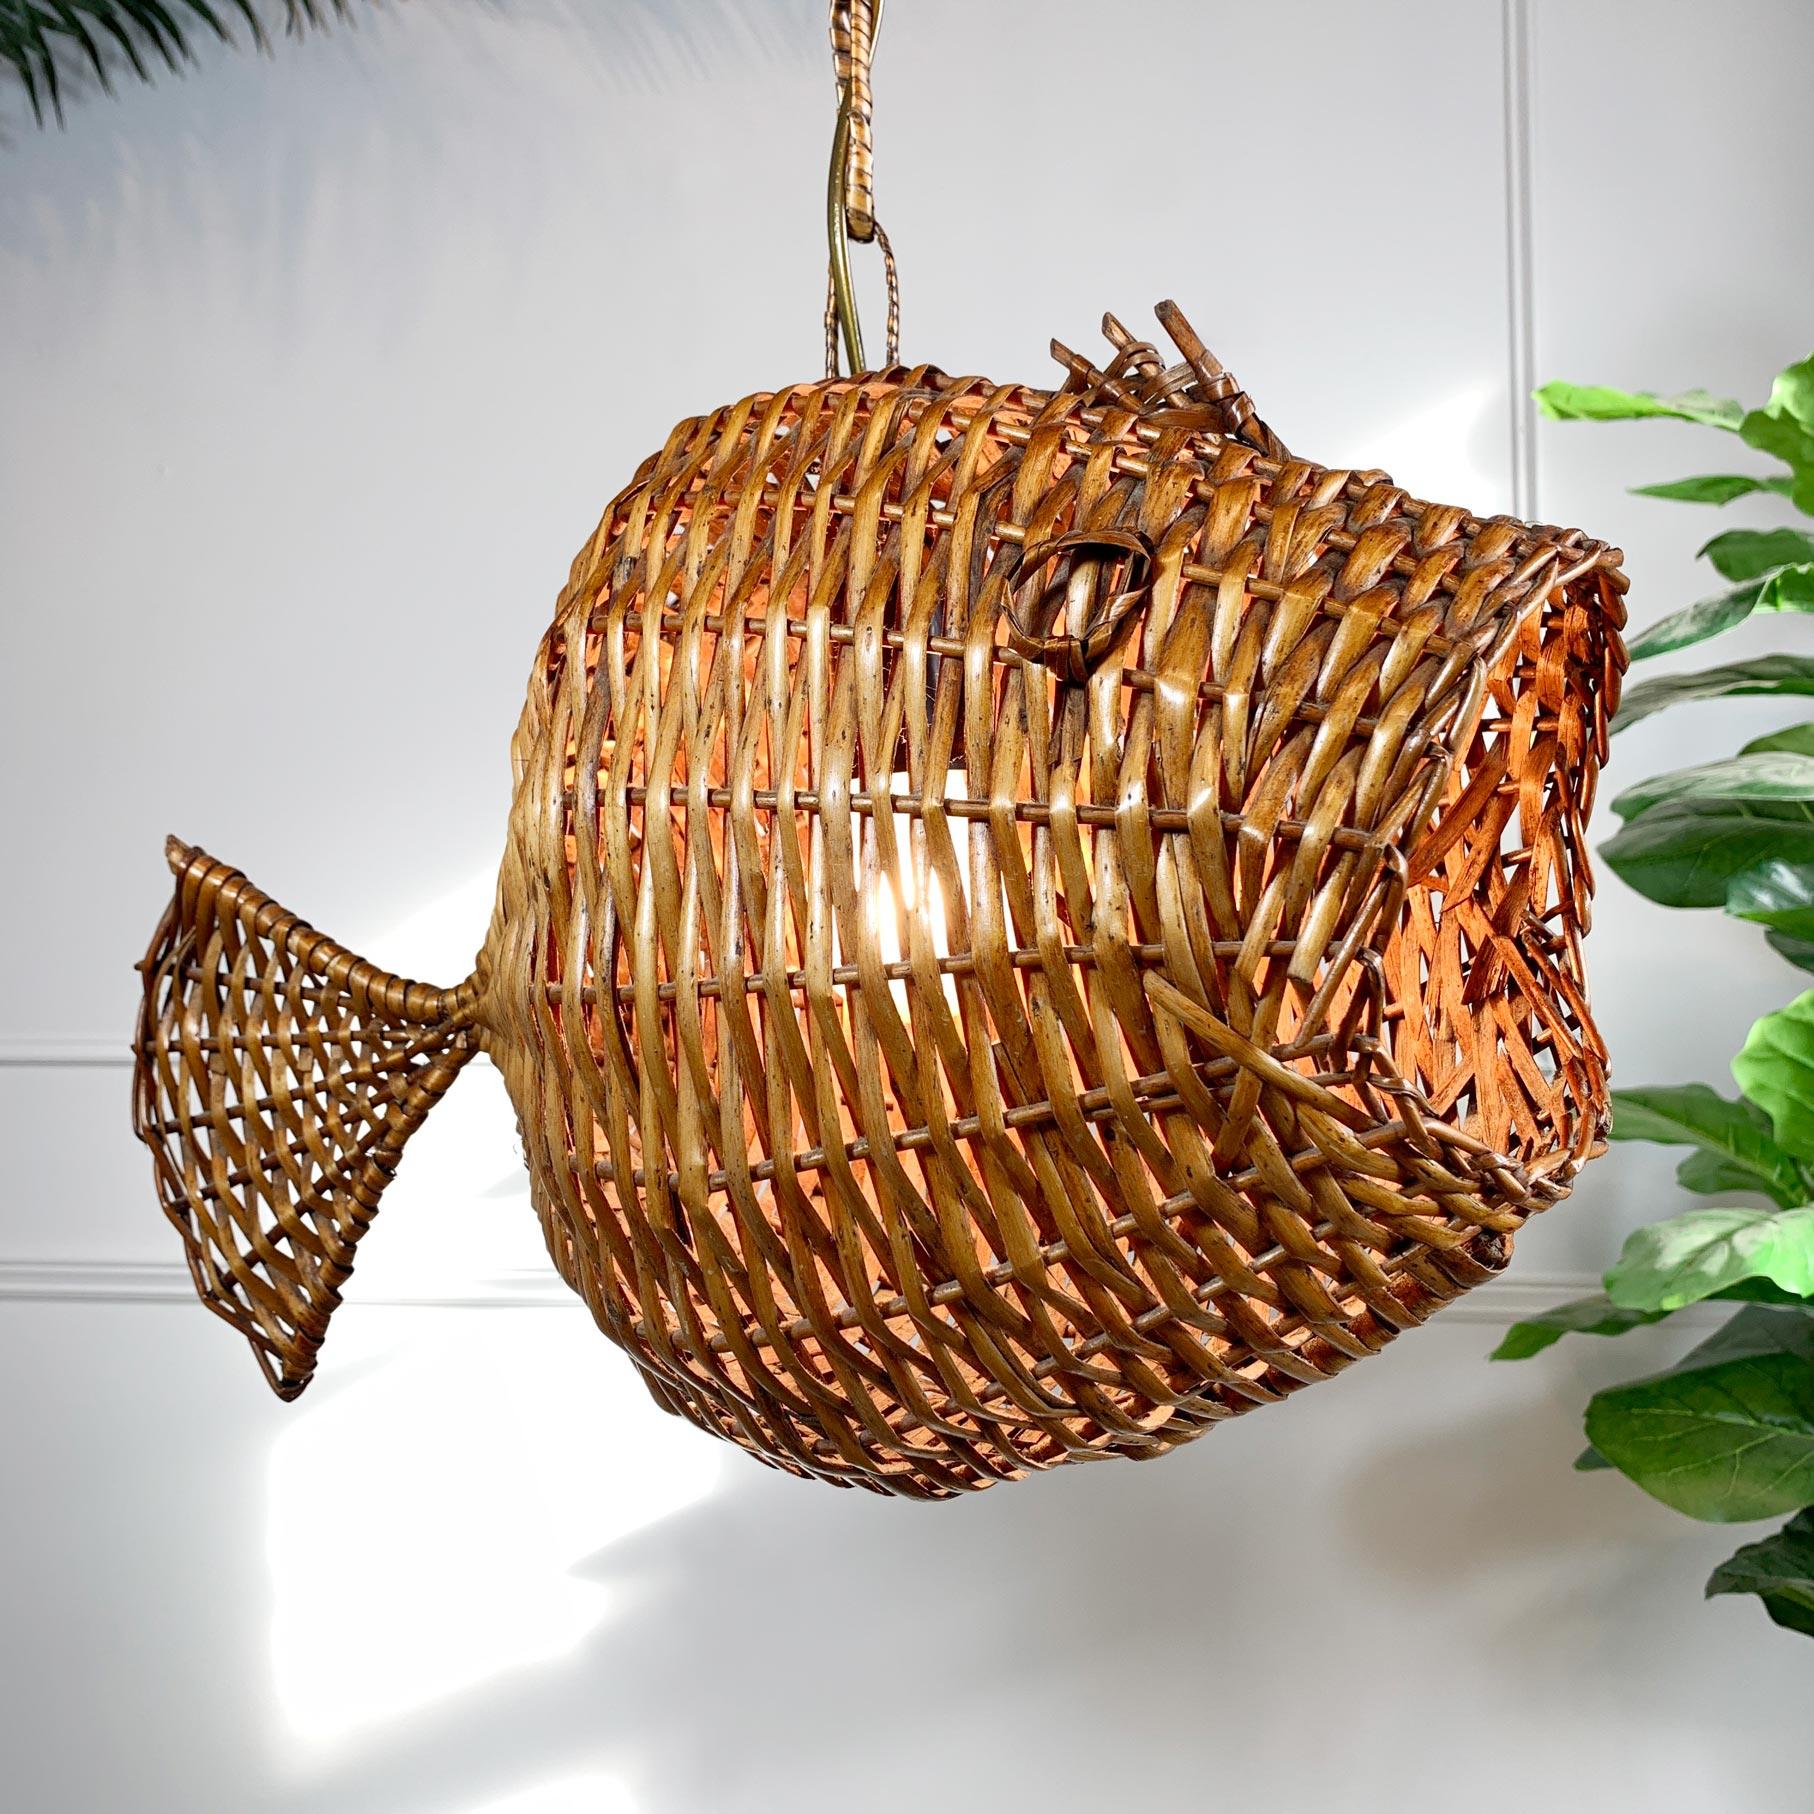 Superb 1950’s wicker fish ceiling light, French. Due to their nature these original ceiling lights are incredibly rare to find from this period and especially in such good condition.

The single e27 lamp holder sits inside the body of the Fish, the